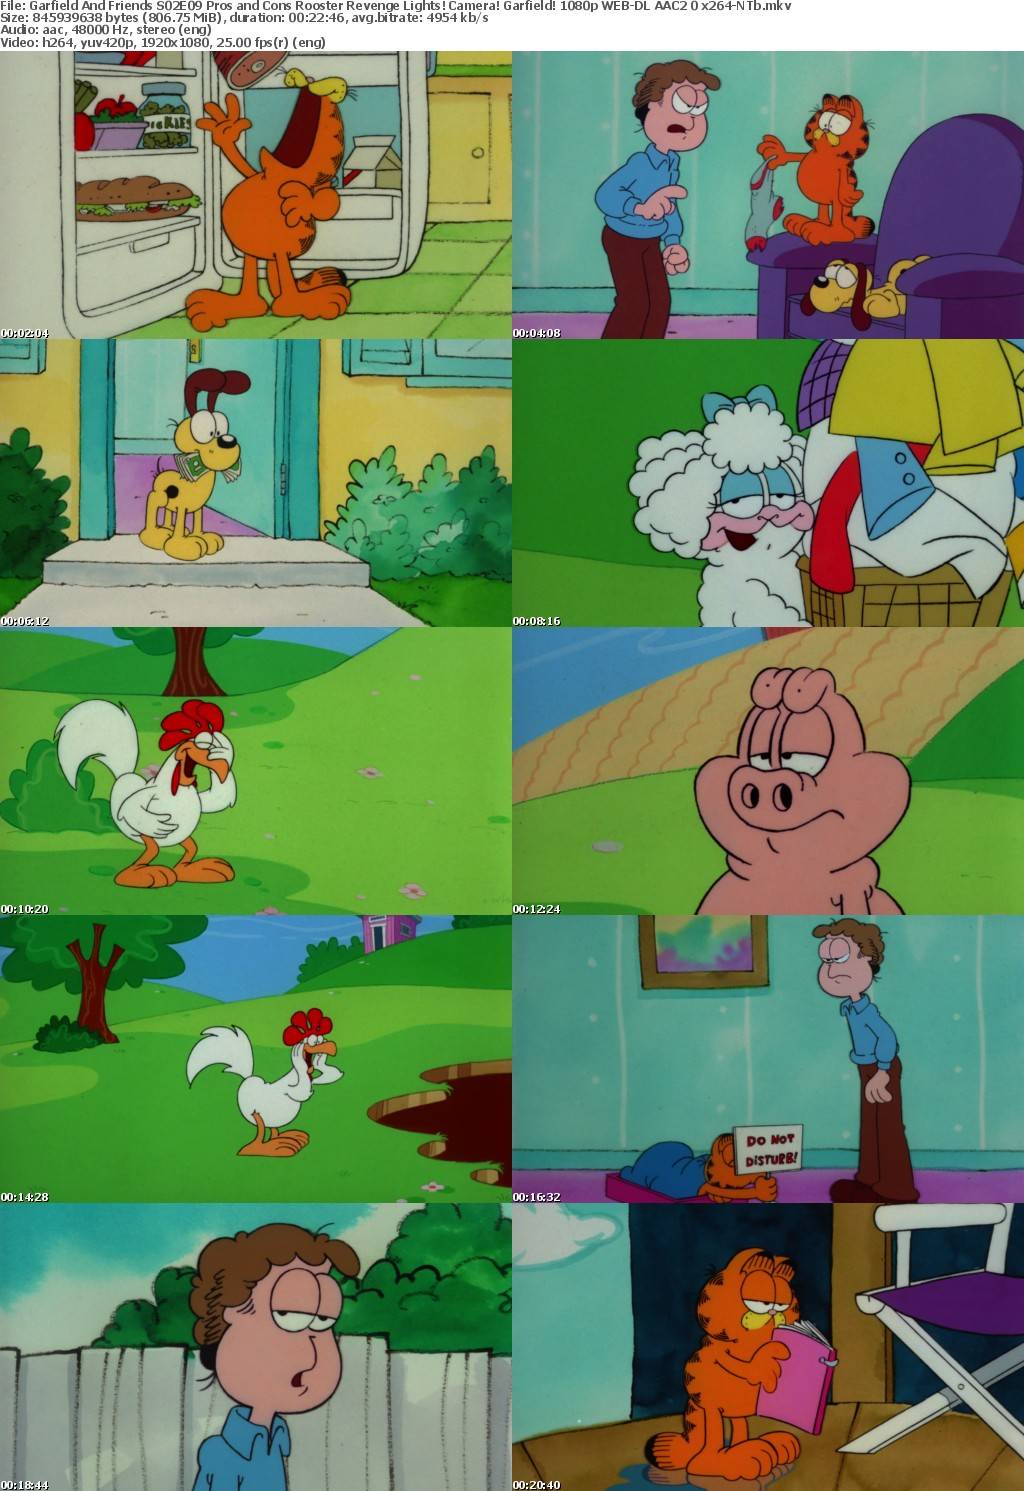 Garfield And Friends S02E09 Pros and Cons Rooster Revenge Lights! Camera! Garfield! 1080p WEB-DL AAC2 0 x264-NTb